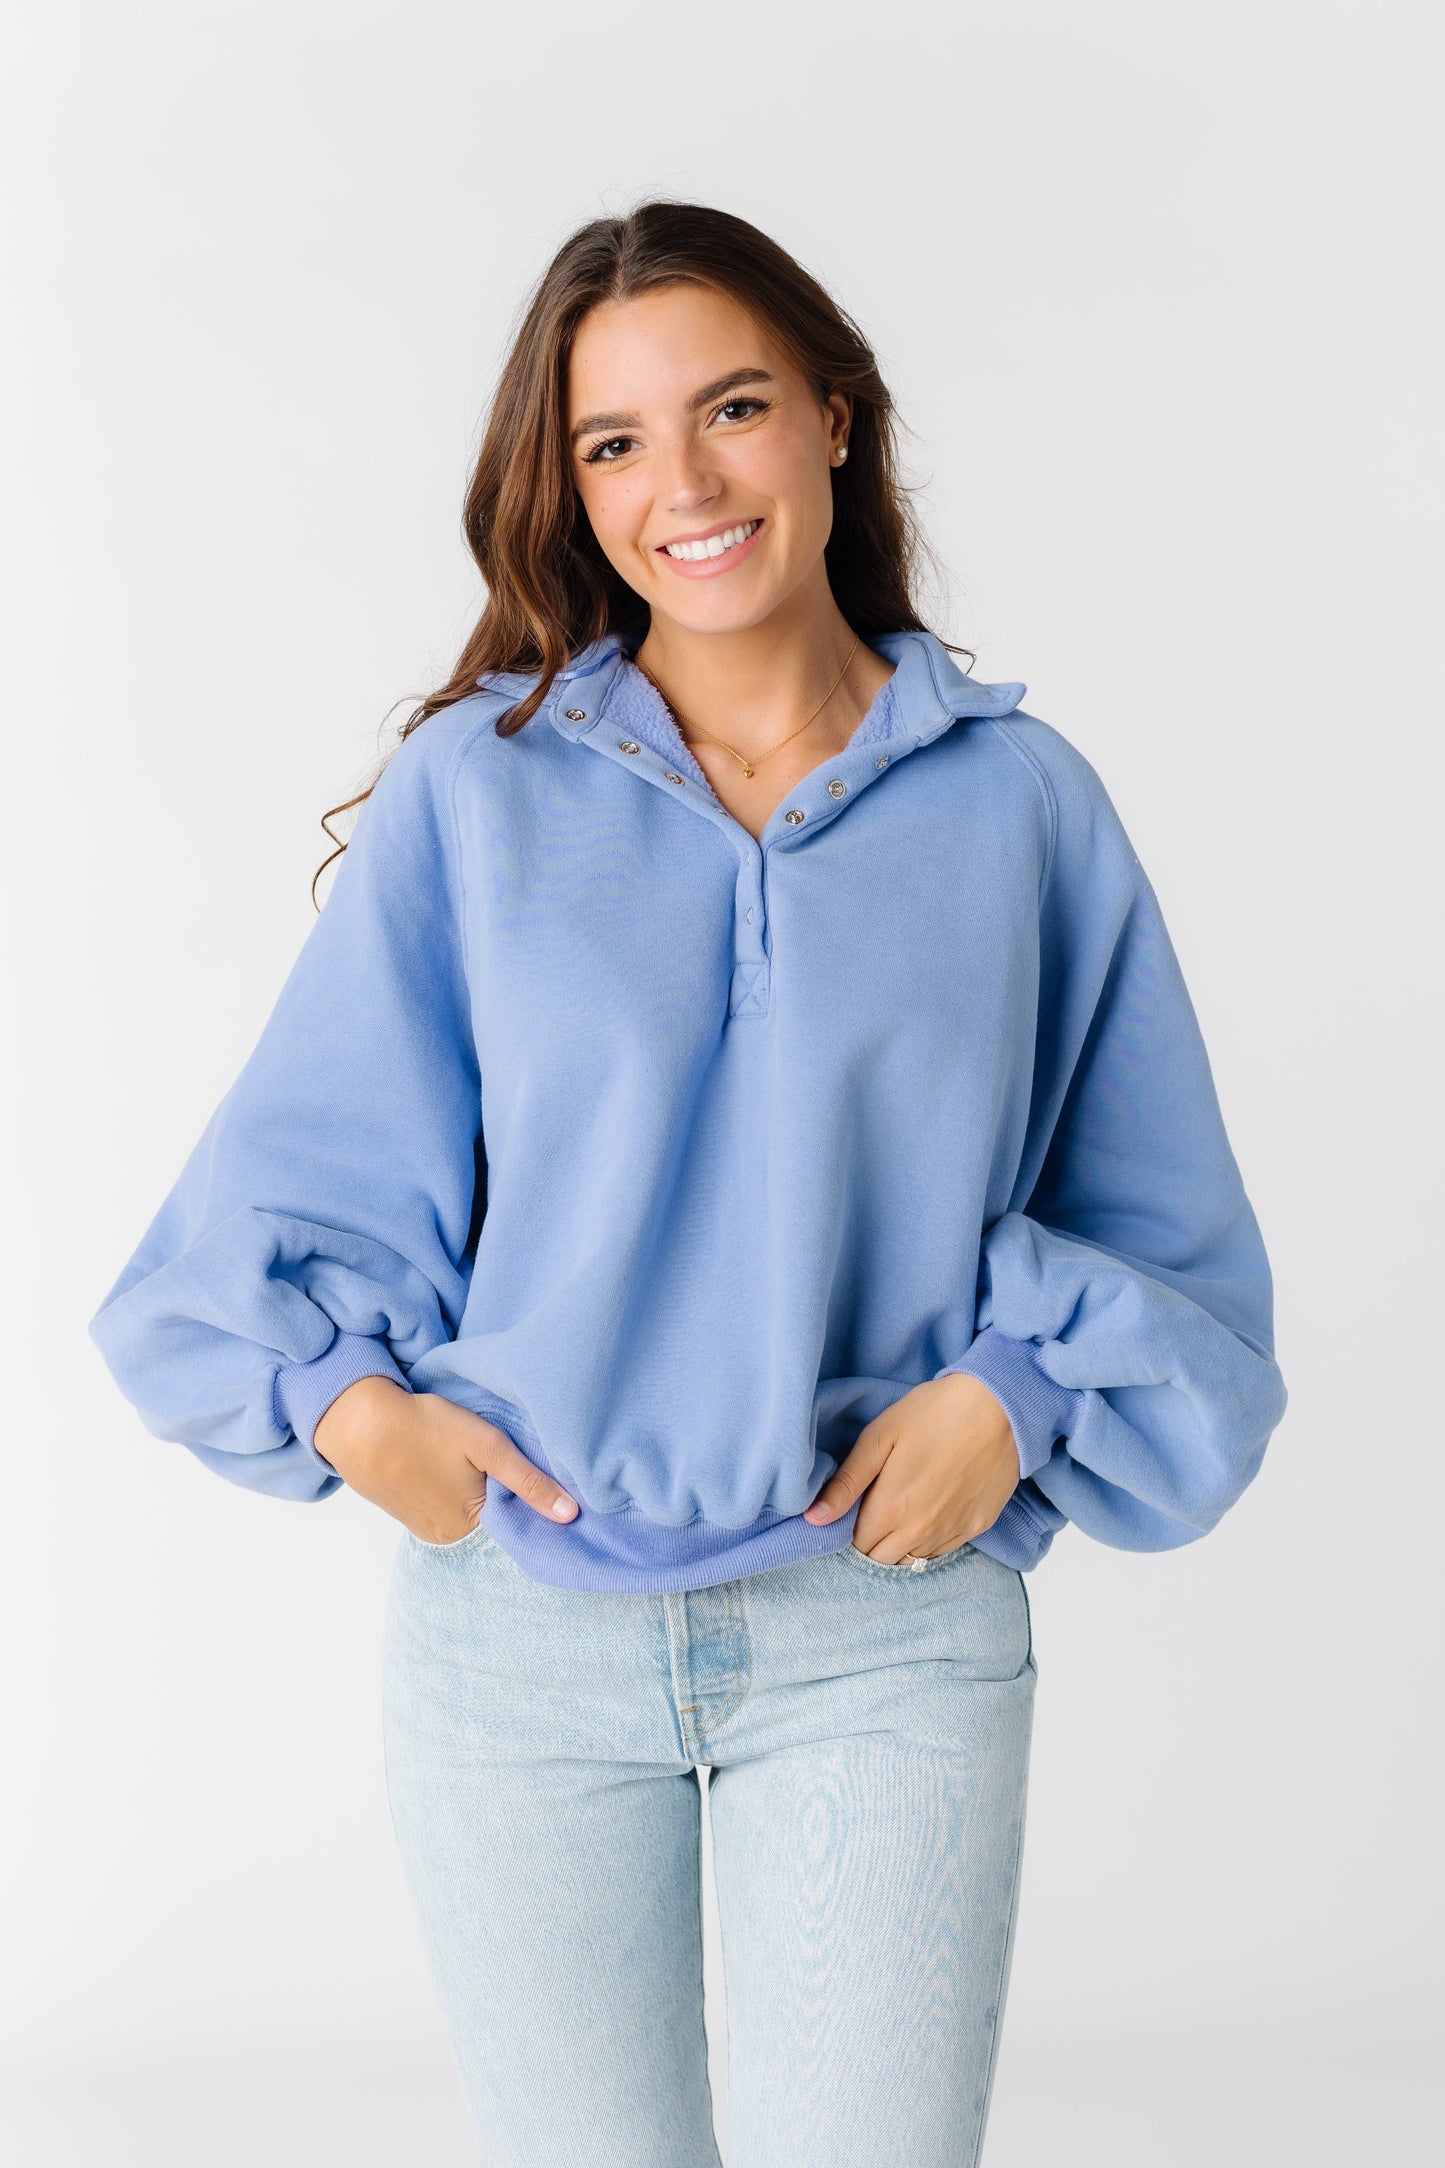 Moon Collared Sweater - New WOMEN'S SWEATERS Paper Moon Blue L 